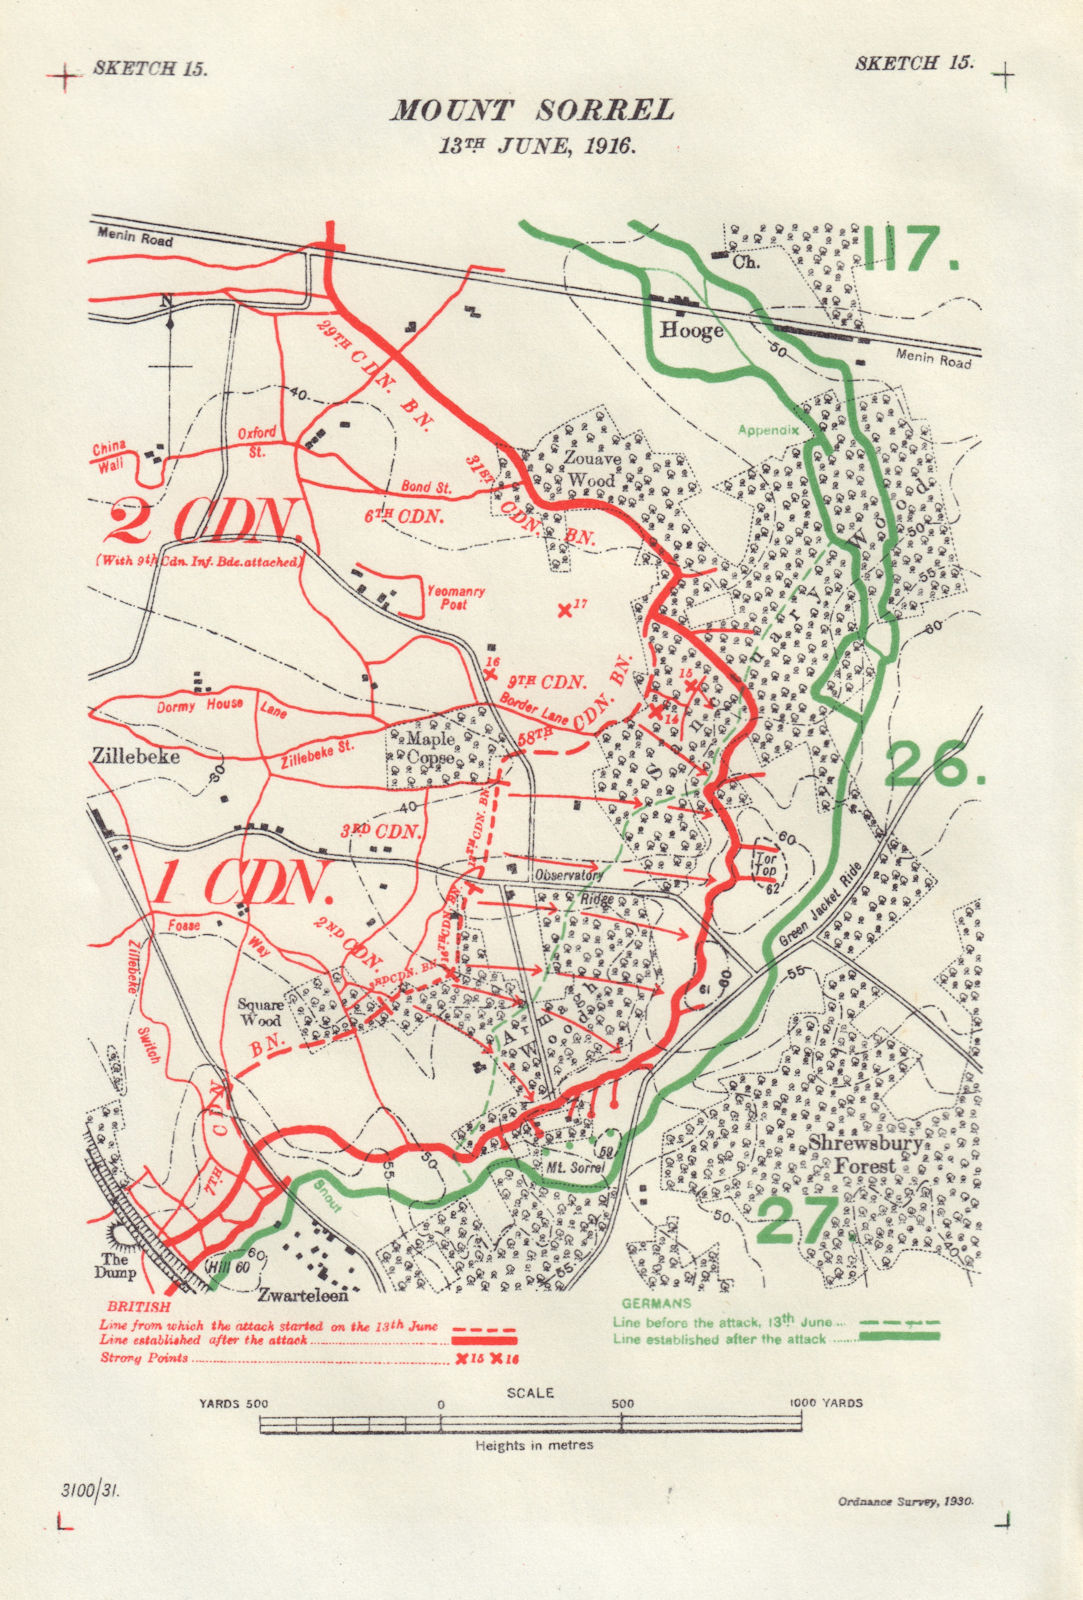 Battle of Mount Sorrel, 13th June 1916. Ypres Salient. WW1. Trenches 1932 map